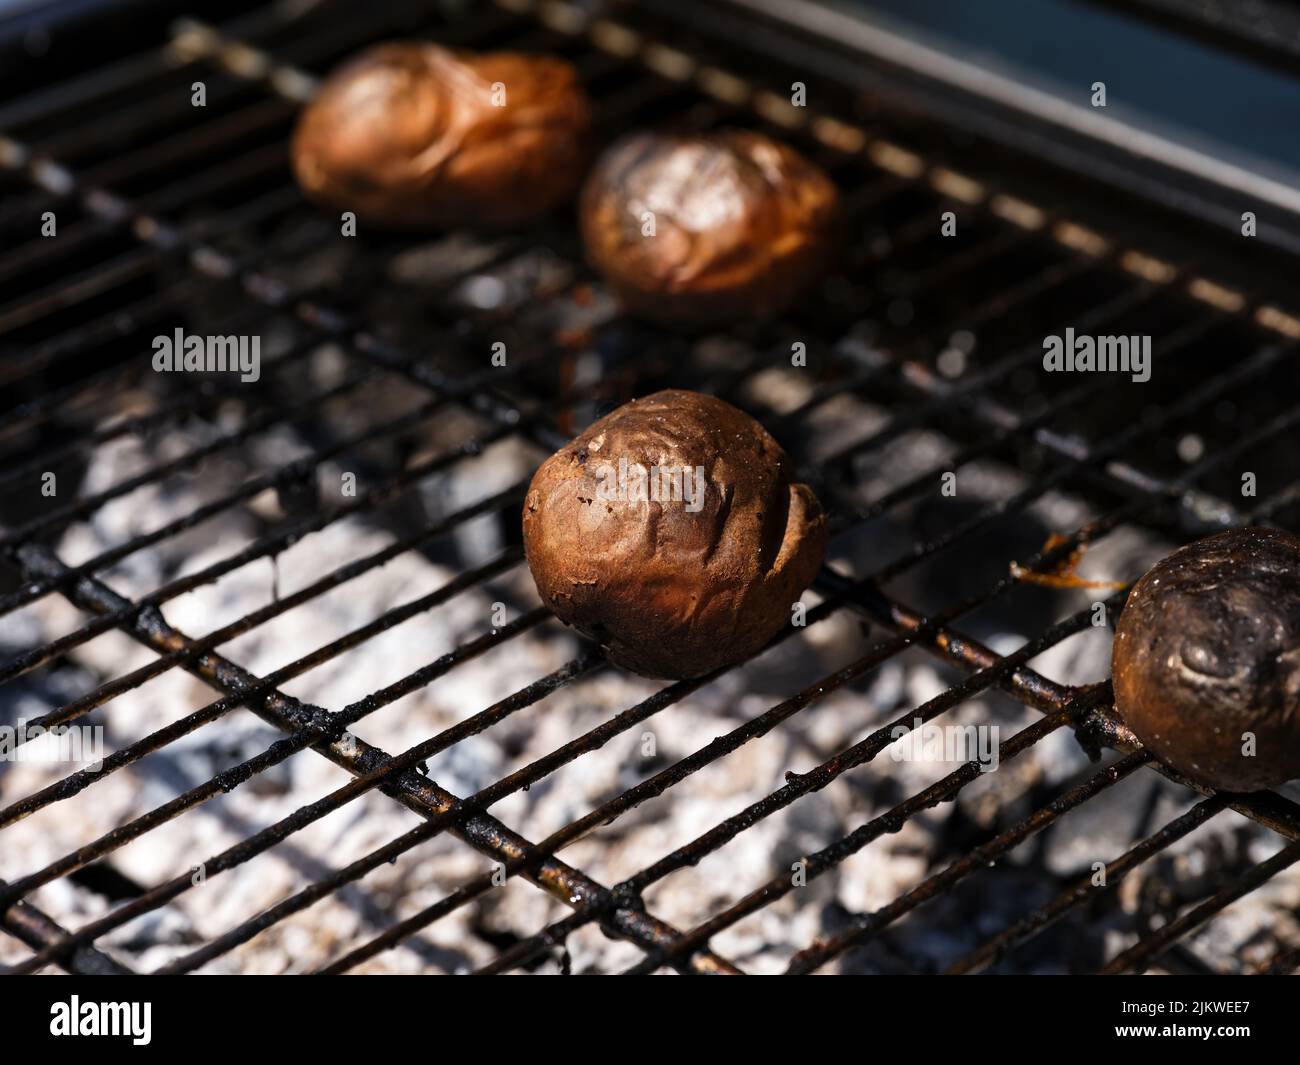 Potatoes baked on a grill grid. Close-up Stock Photo